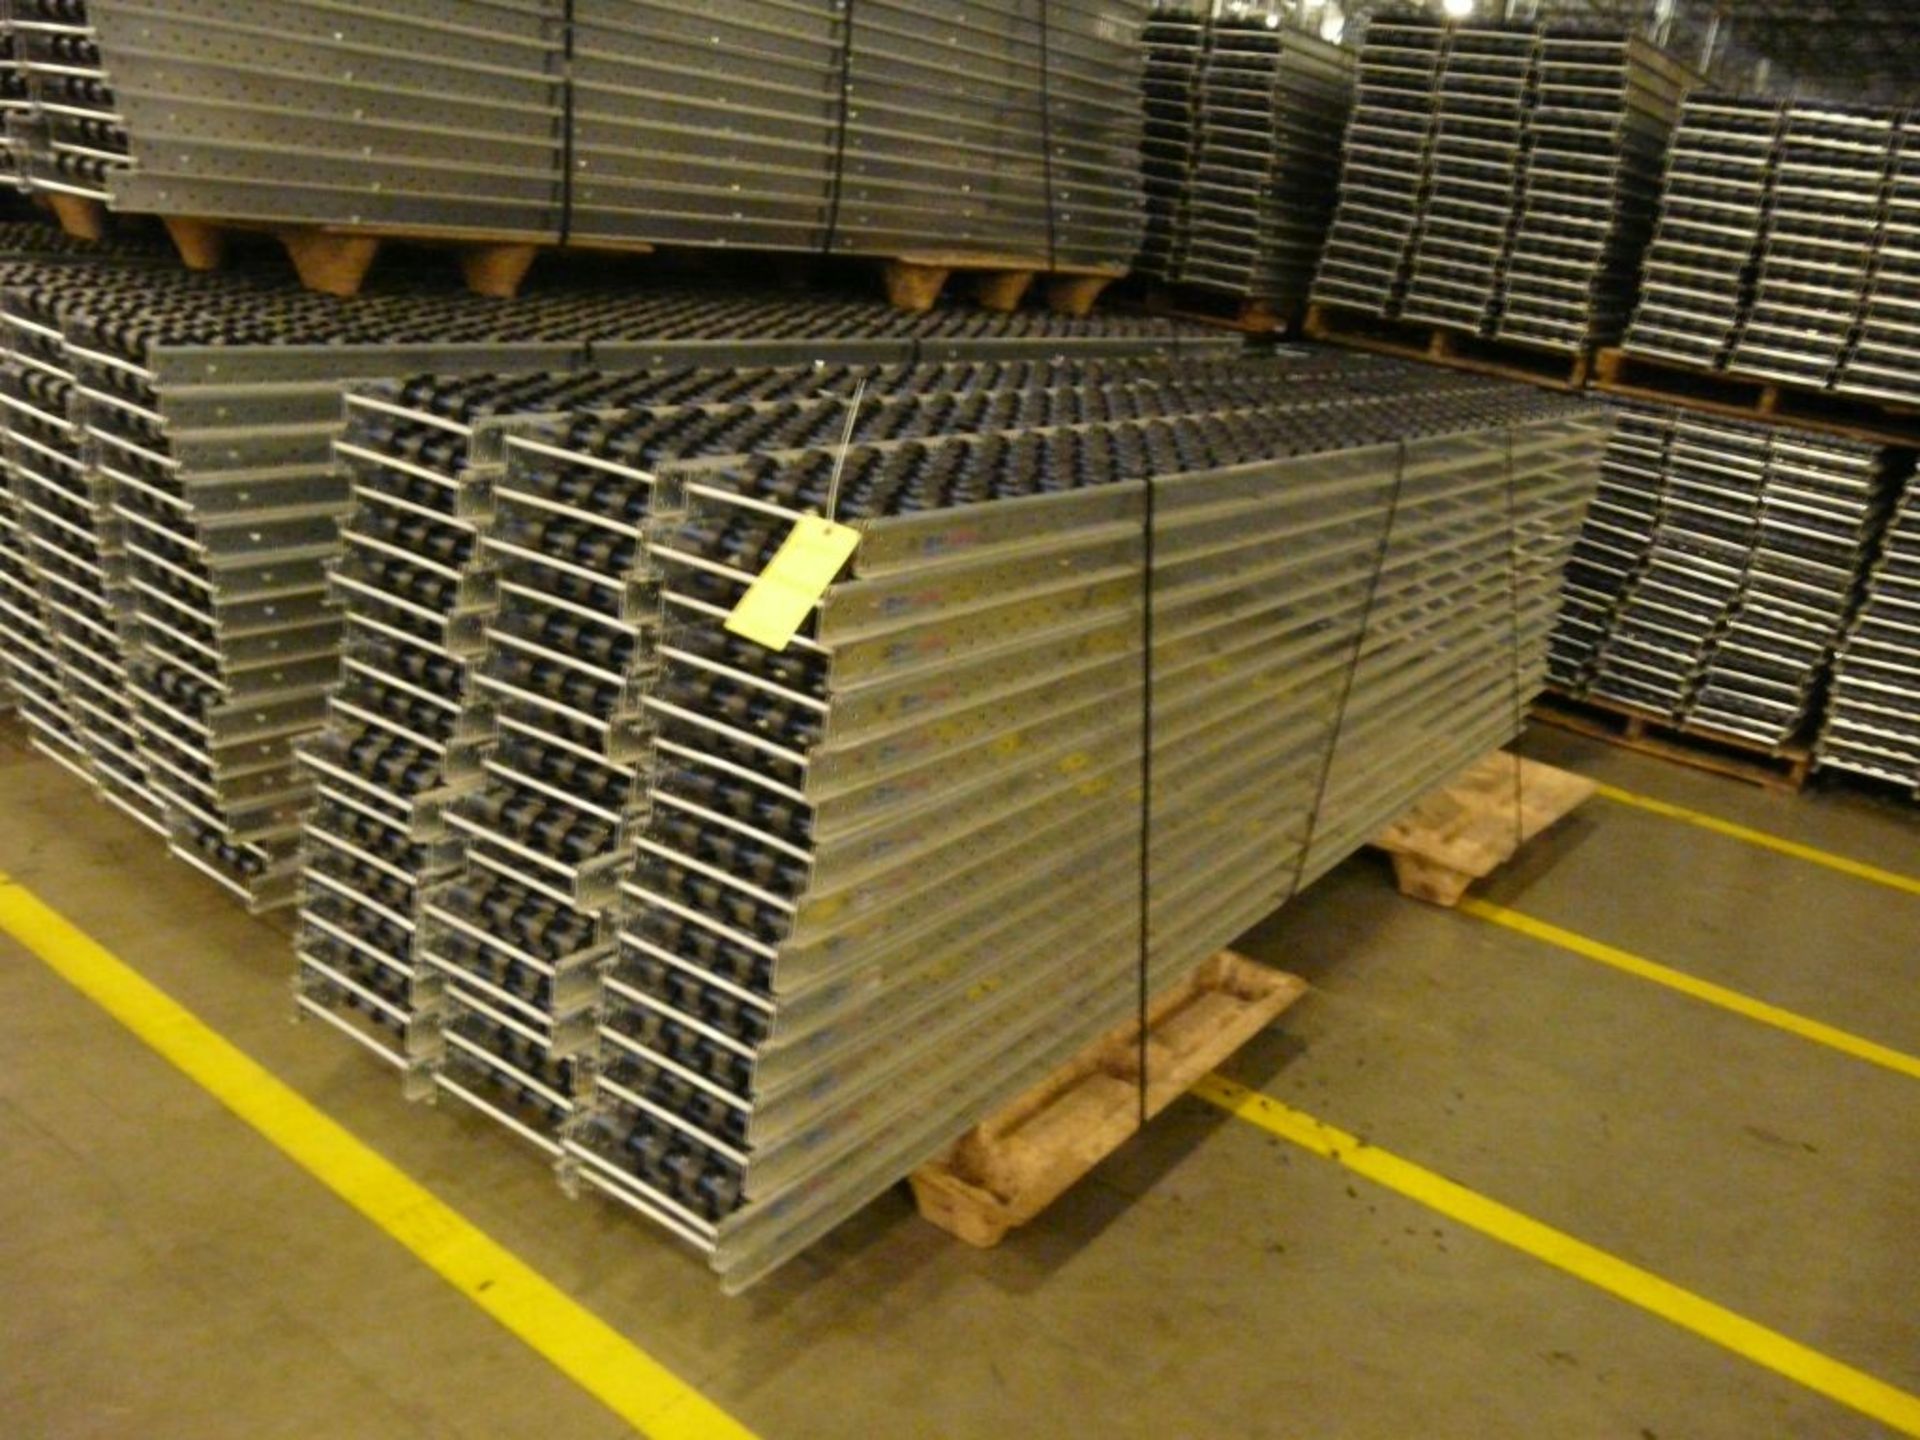 Lot of (90) SpanTrack Wheelbed Carton Flow Conveyors - 11.5'L x 11"W; Tag: 223574 - $30 Lot